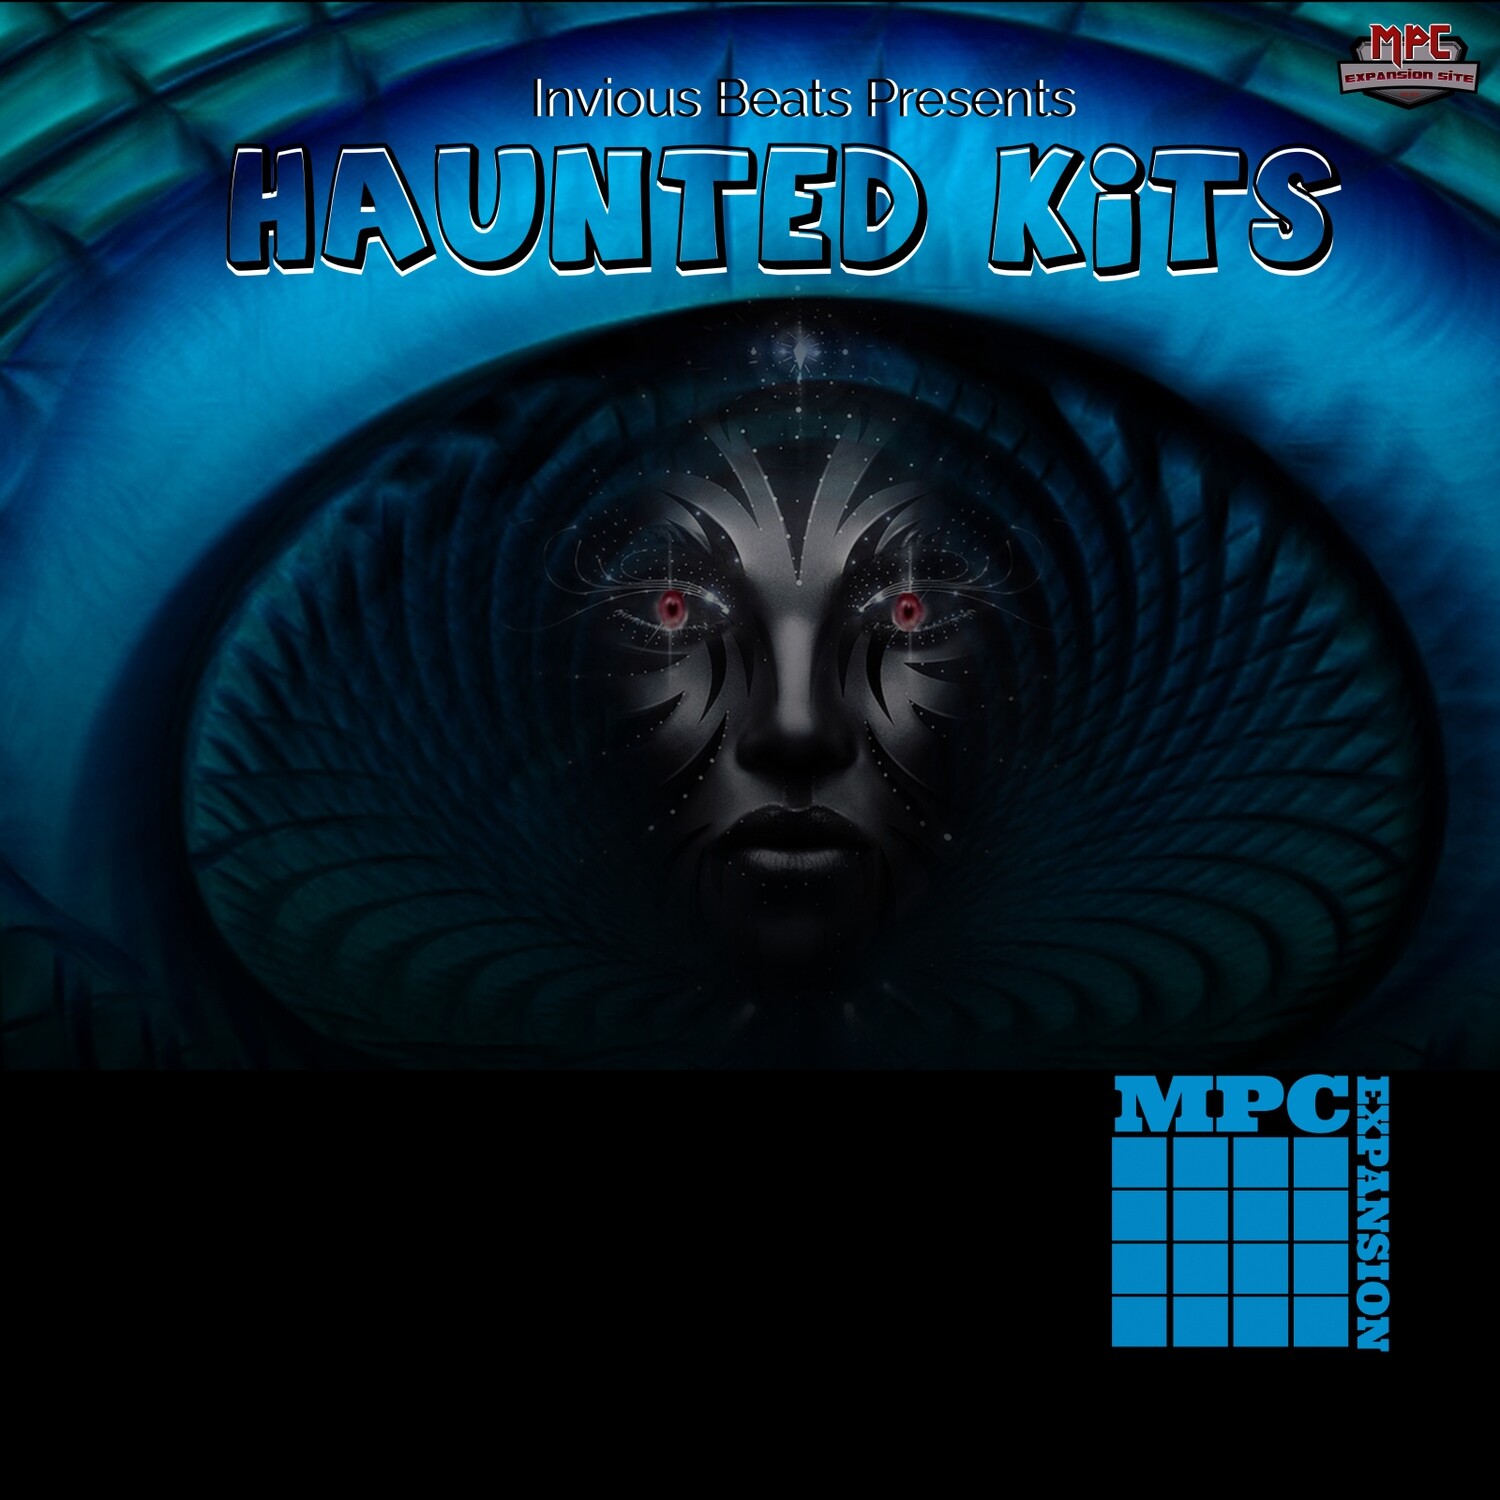 MPC EXPANSION 'HAUNTED KITS' by INVIOUS